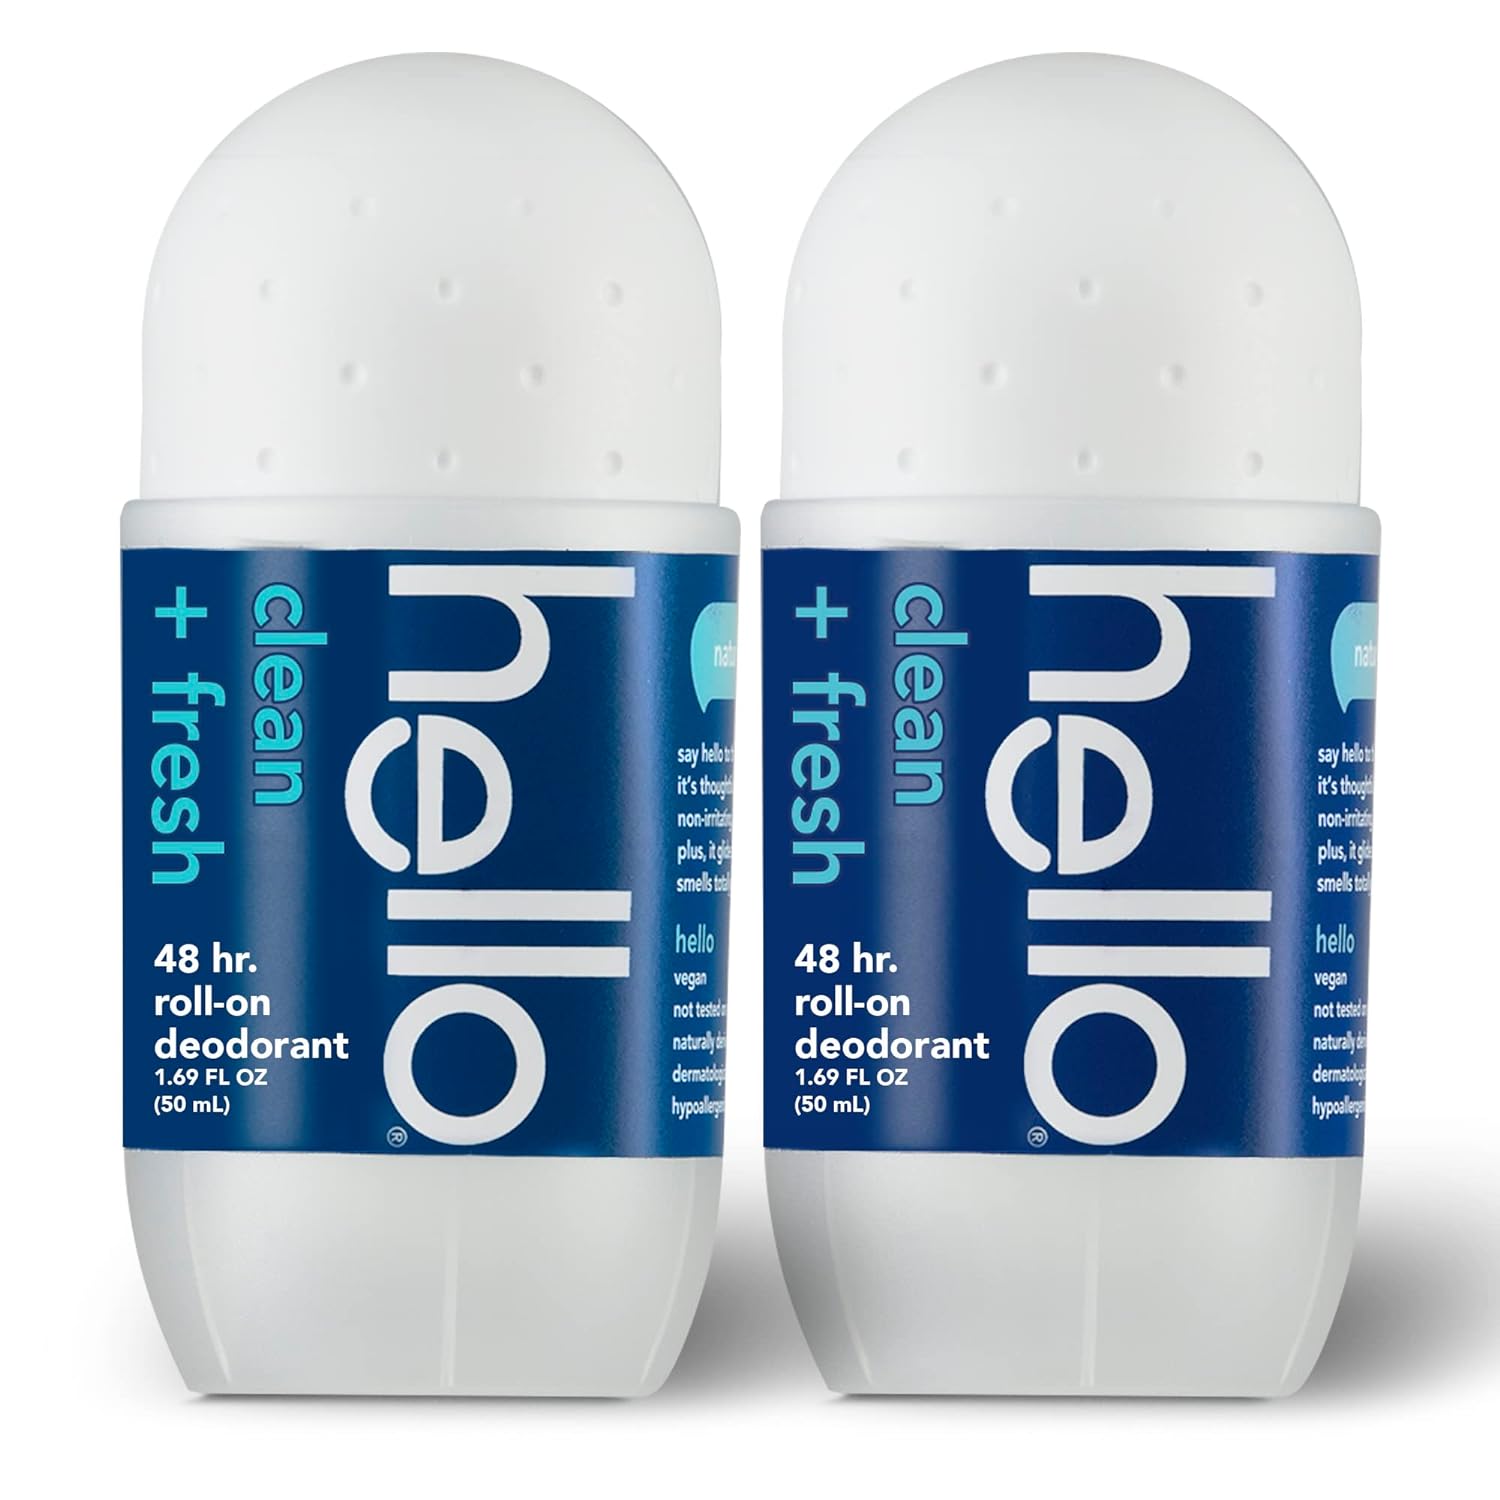 hello Clean & Fresh Roll On Deodorant, Aluminum Free Deodorant for Women + Men, 48 Hour Non Sticky Formula, Dries Quick and Leaves No White Residue, Travel Deodorant, 2 Pack, 1.69 oz Tubes